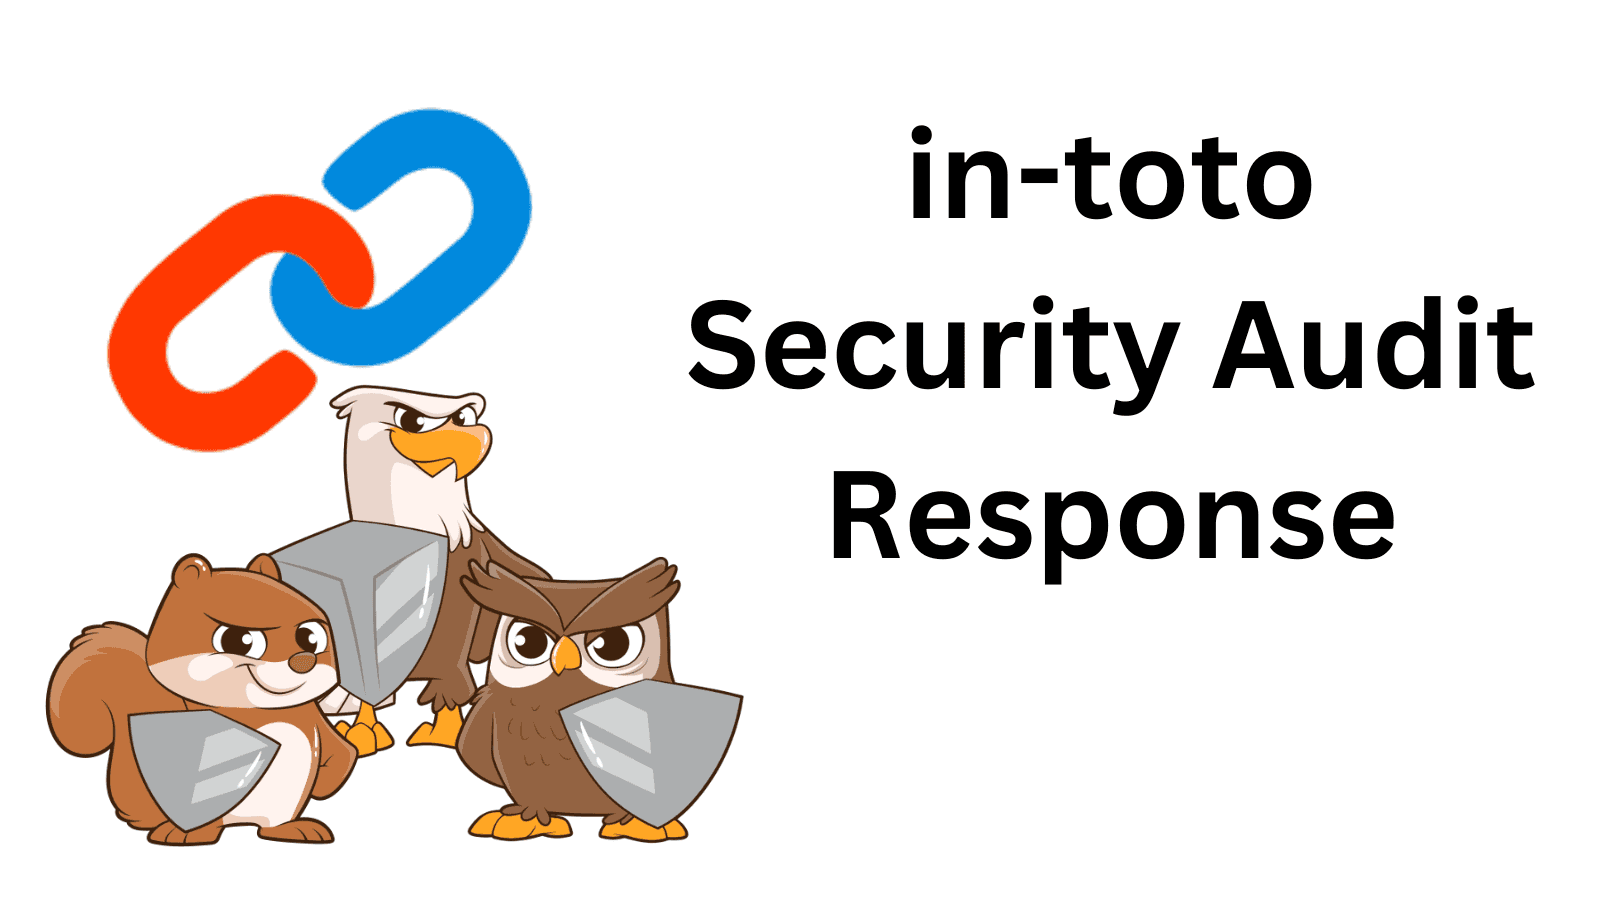 in-toto Security Audit Response